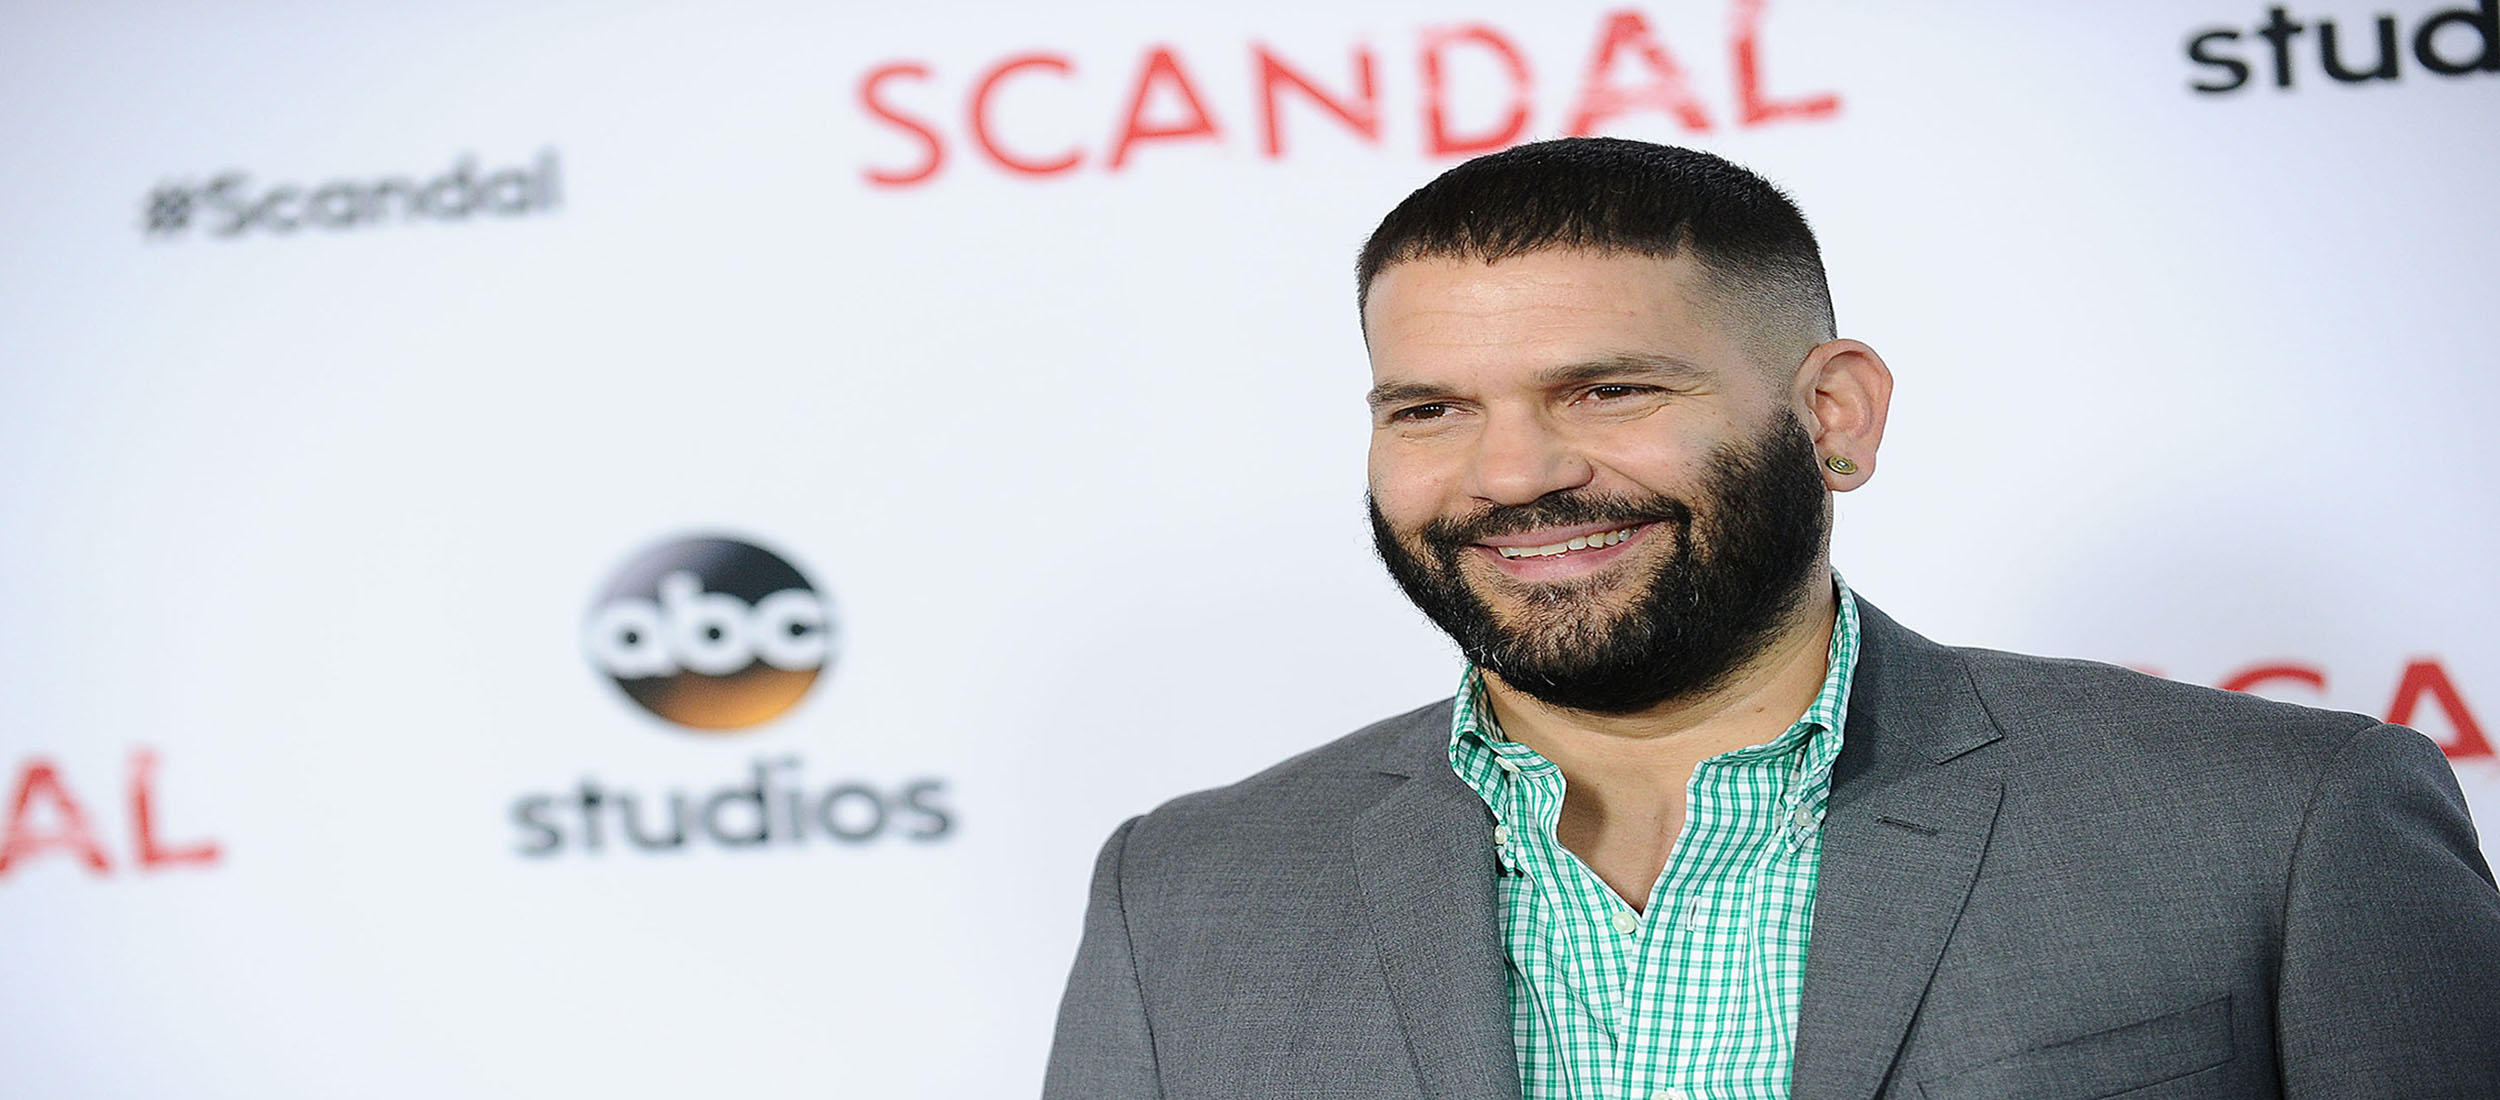 LOS ANGELES, CA - MAY 01:  Actor Guillermo Diaz attends the "Scandal" ATAS event at Directors Guild Of America on May 1, 2015 in Los Angeles, California.  (Photo by Jason LaVeris/FilmMagic)